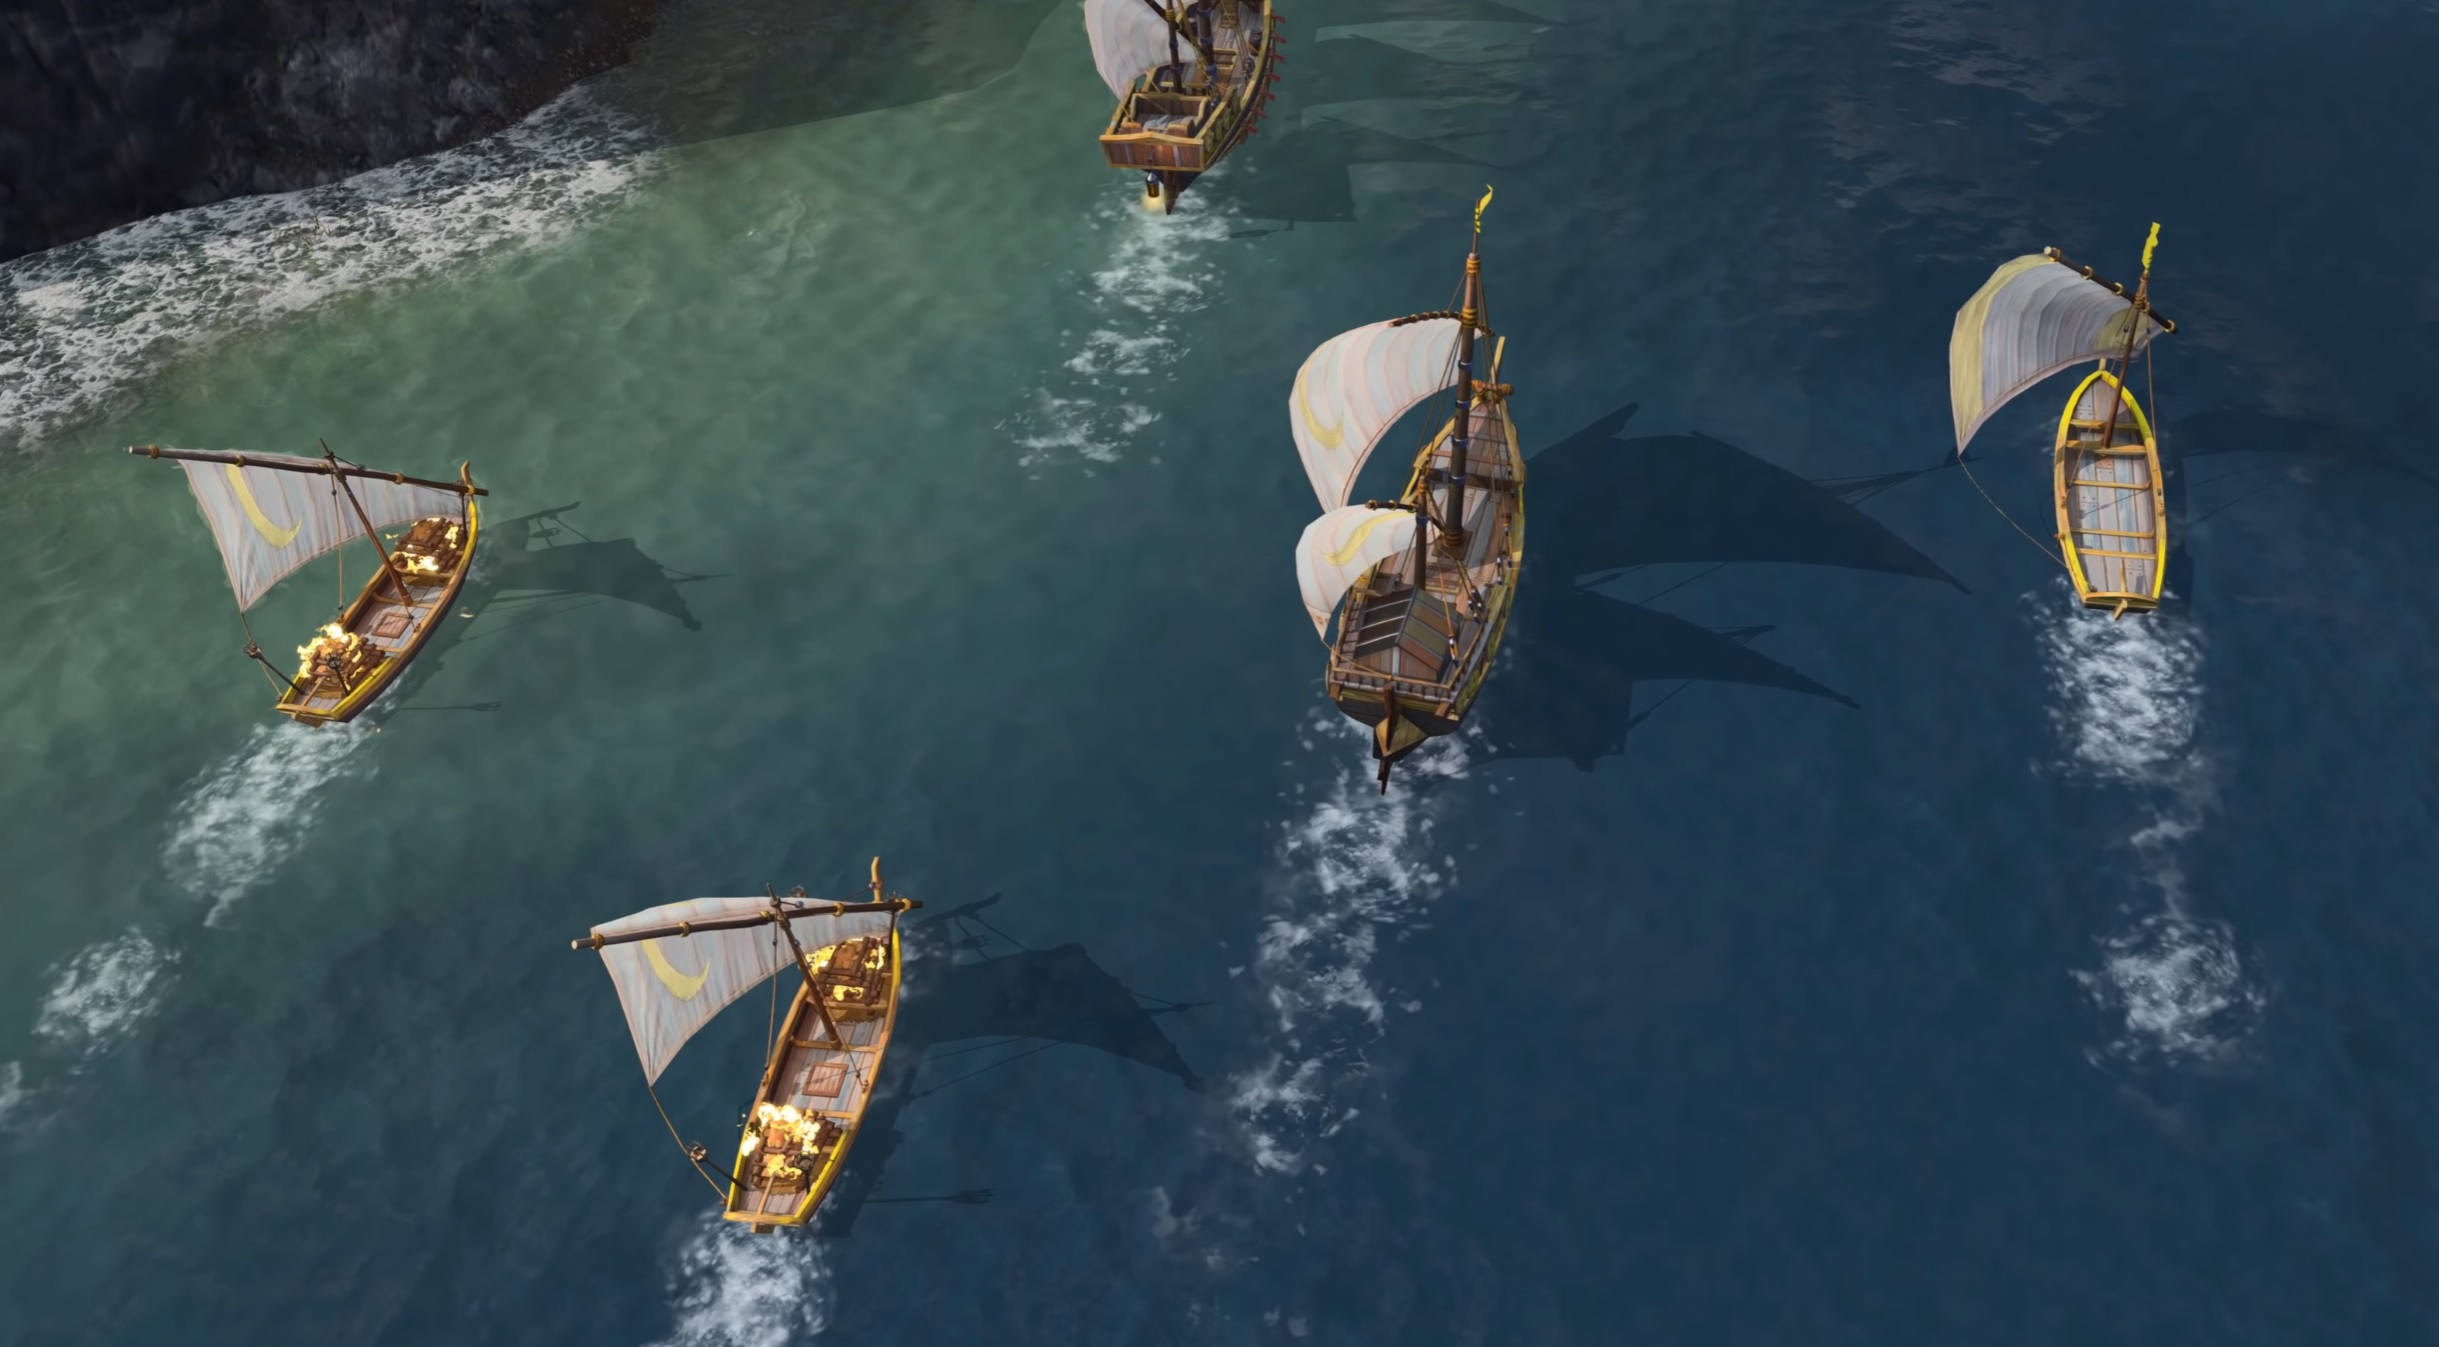 Age of Empires IV’s Latest Trailer Shows Off Its Naval Warfare – Gameranx